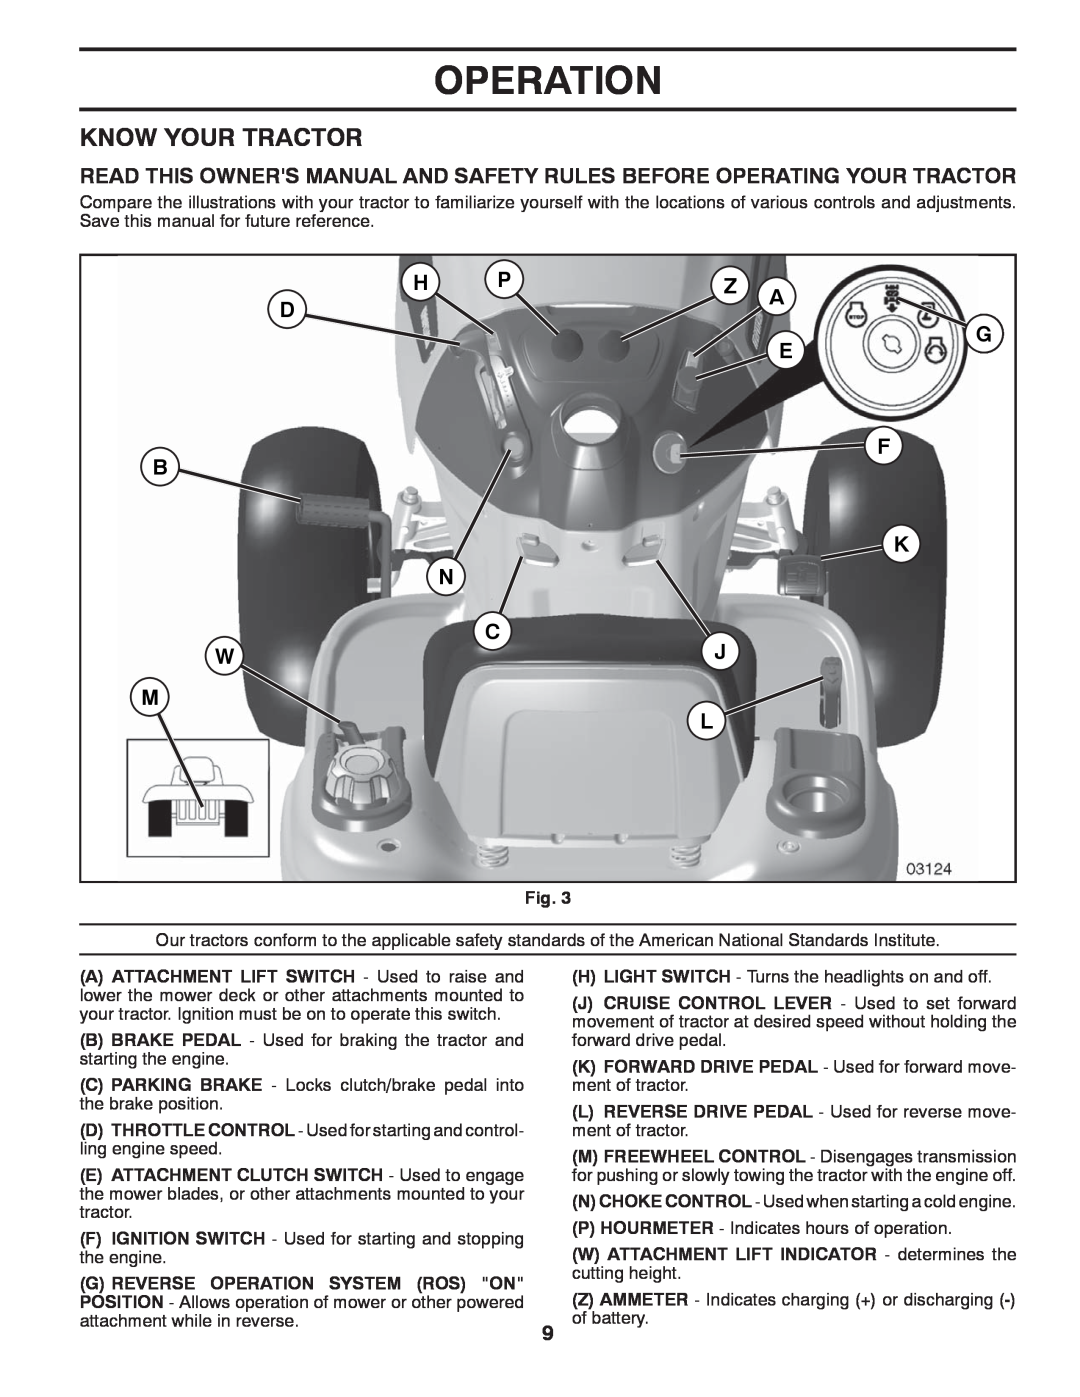 Dixon D26BH54, 434722 manual Know Your Tractor, Operation 